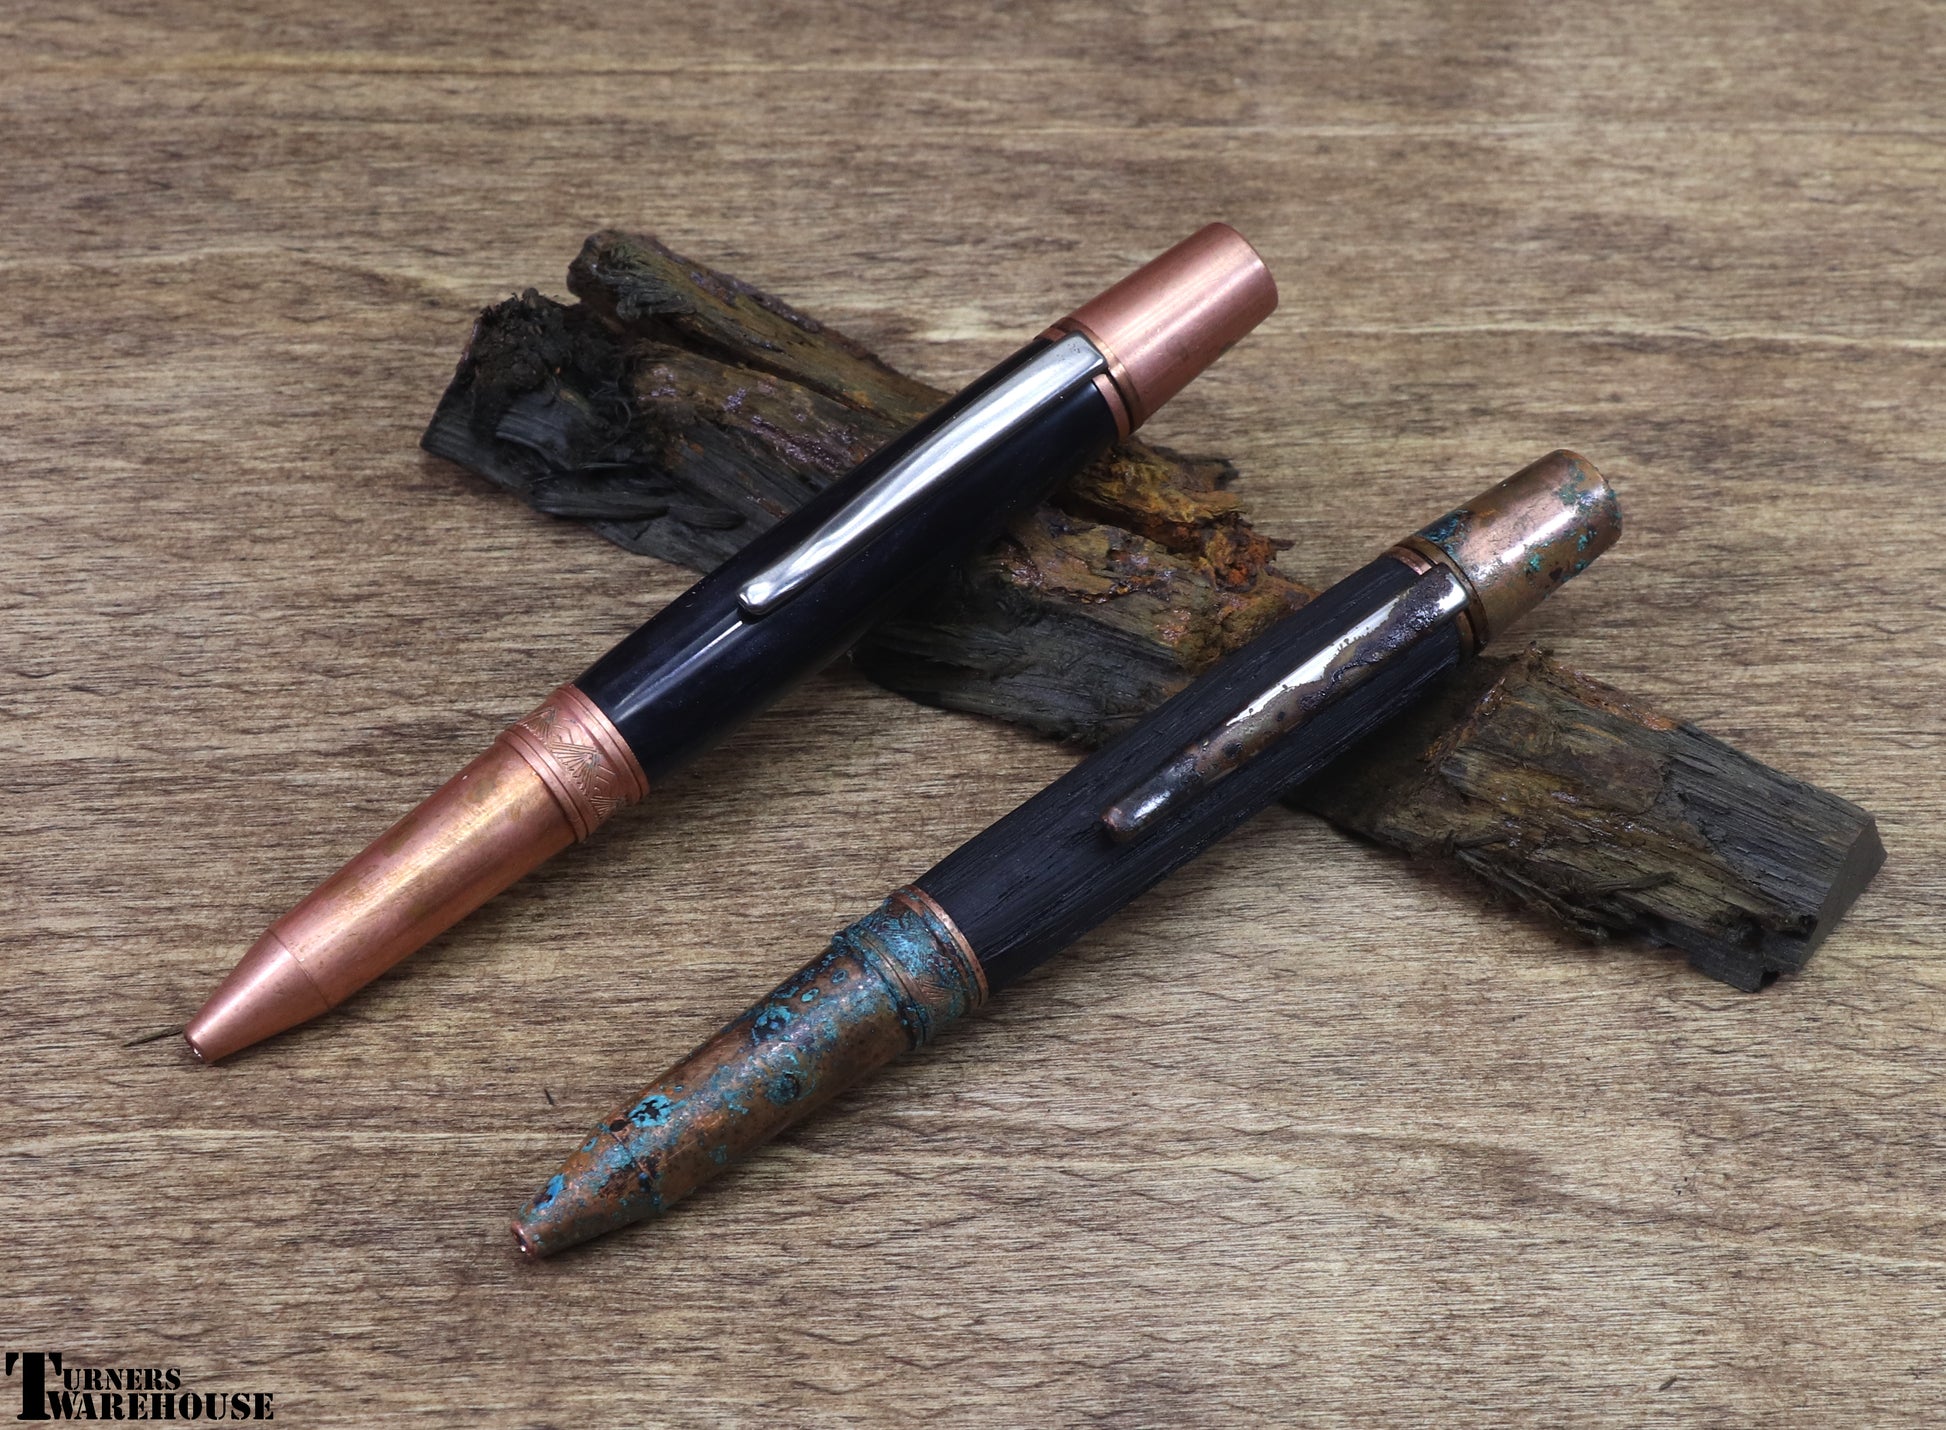  Element Series Twist Pen Kit all Copper with Patina